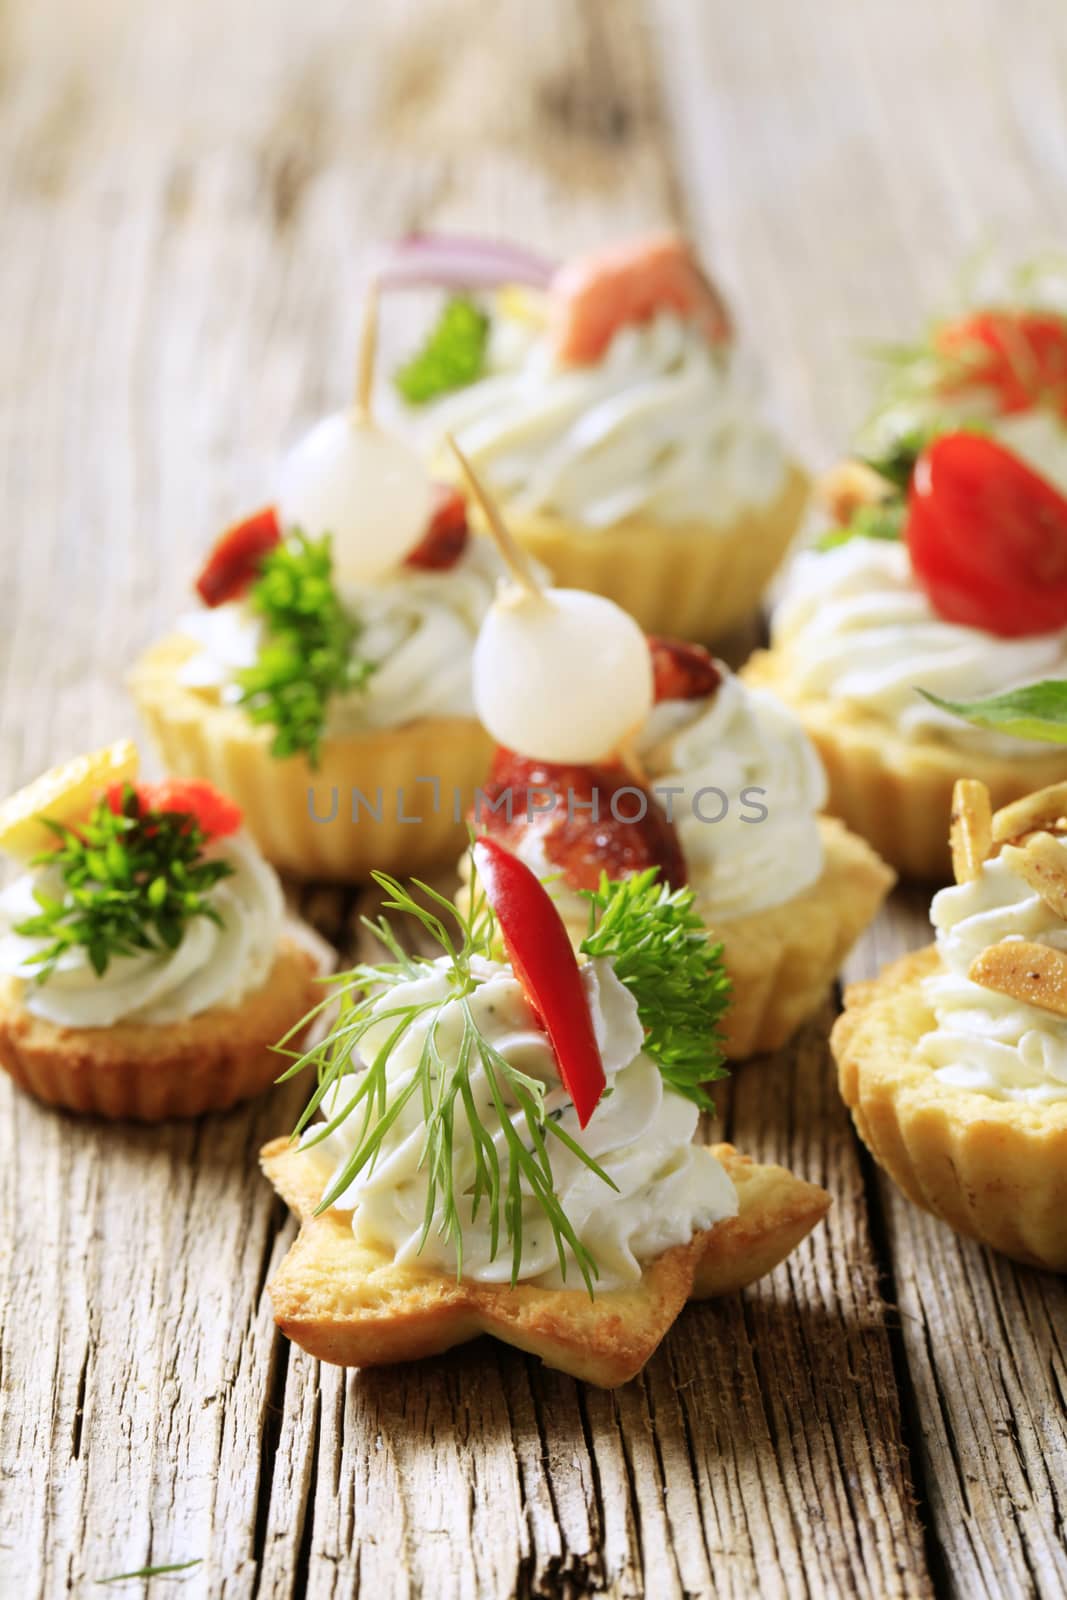 Variety of pastry-based canapes with various toppings